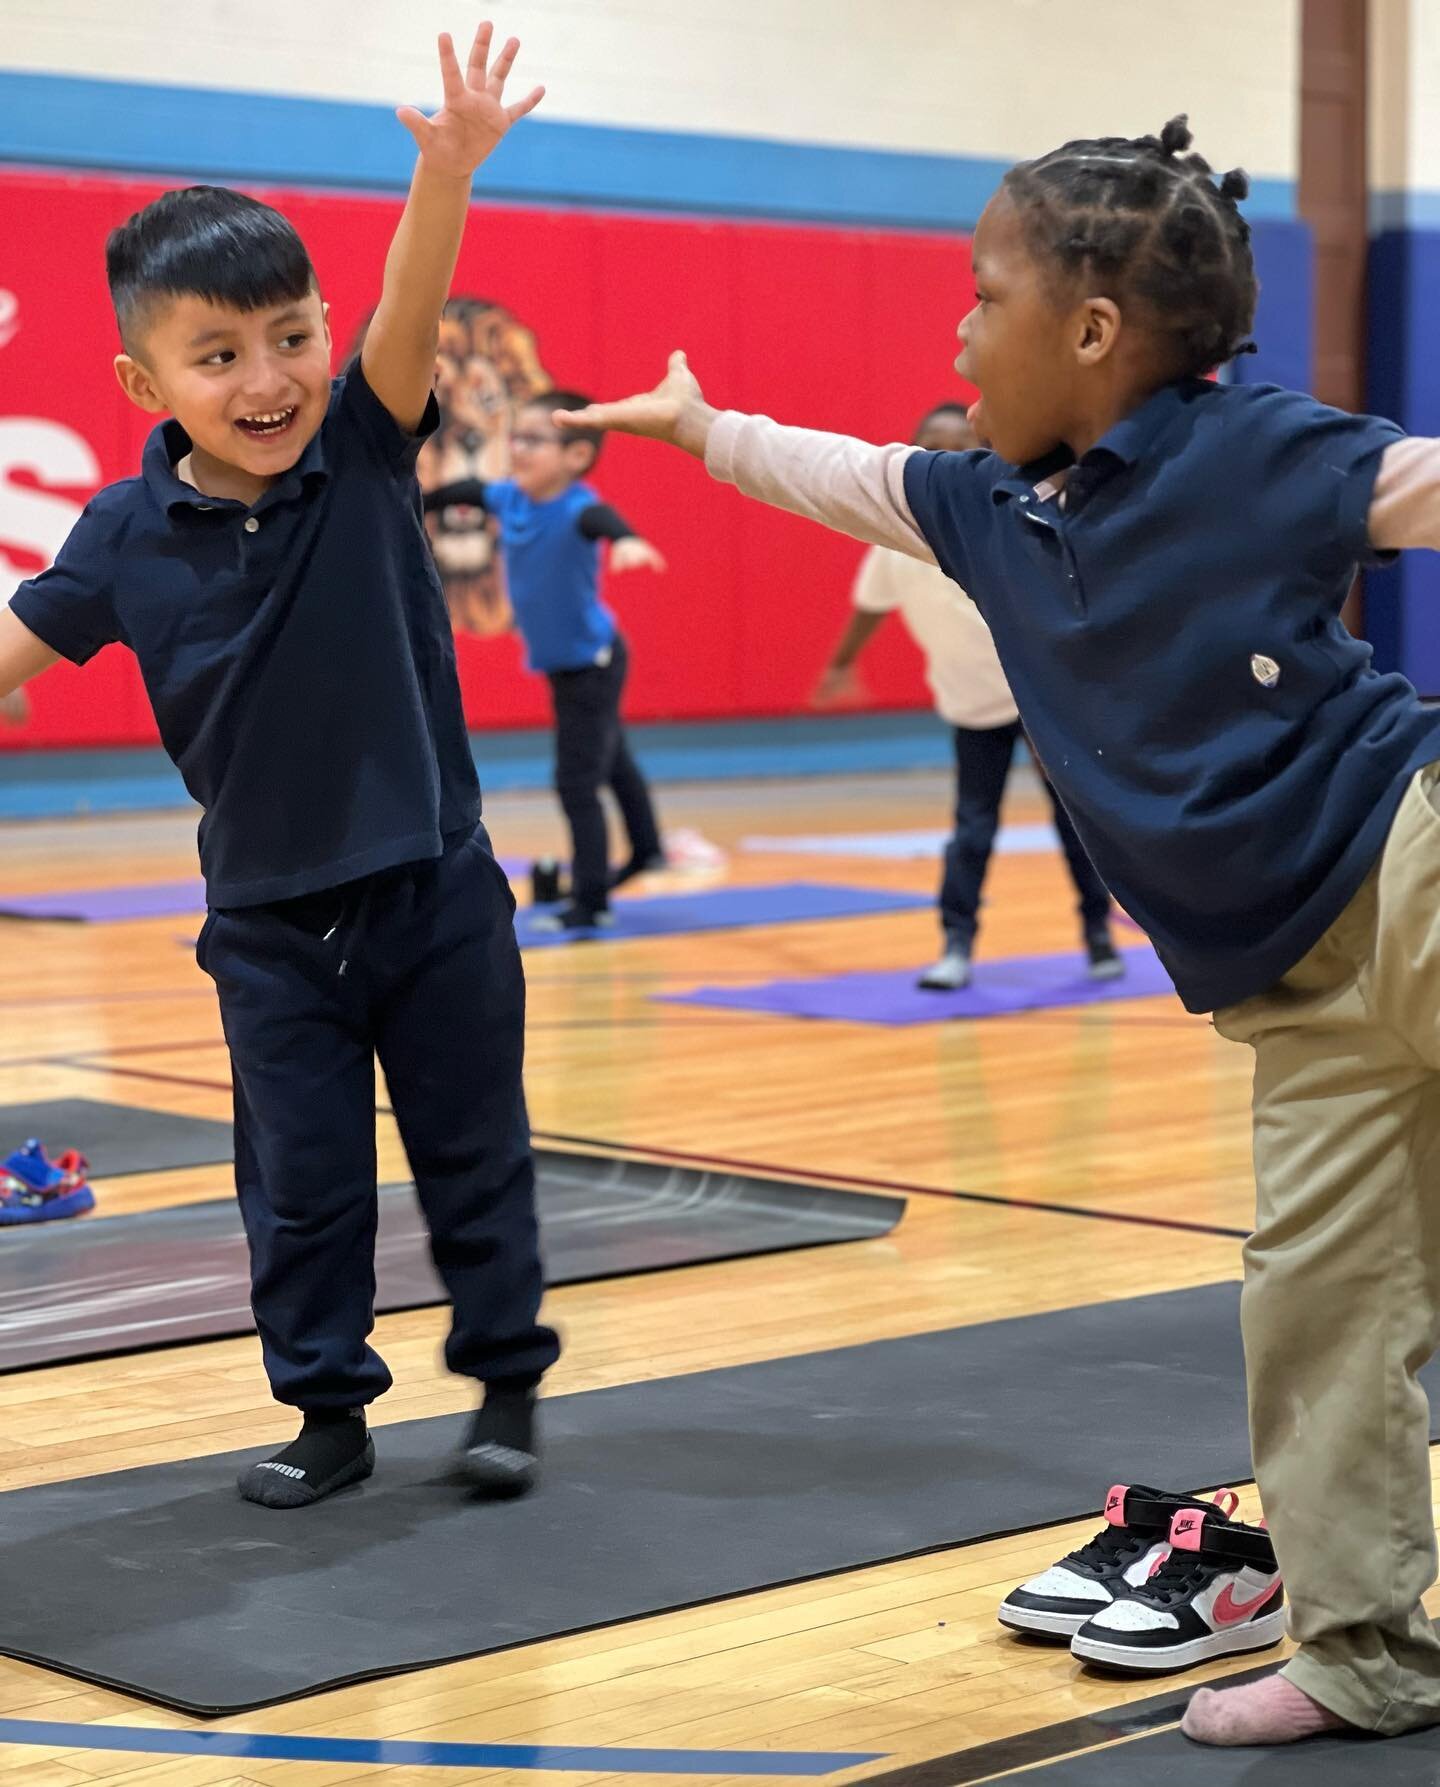 High fives and good vibes! Grab a workout buddy, move your body, and most importantly, have fun this weekend. 

#wellness #fitnessmotivation #selfcare #physicaleducation #chicagowellness